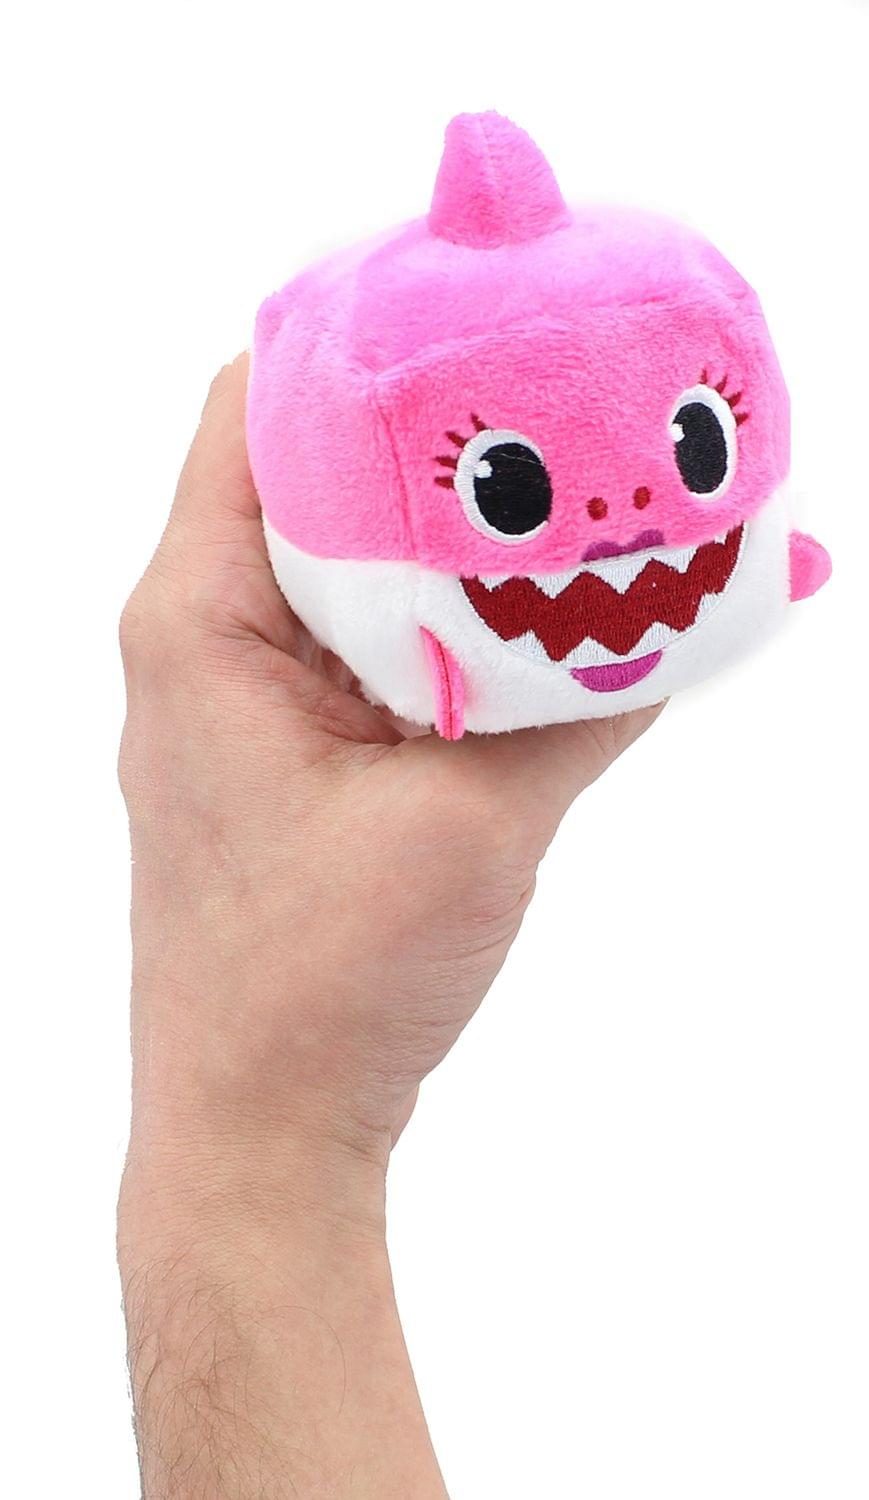 Pinkfong Shark Family 3 Inch Sound Cube Plush - Mommy Shark Pink